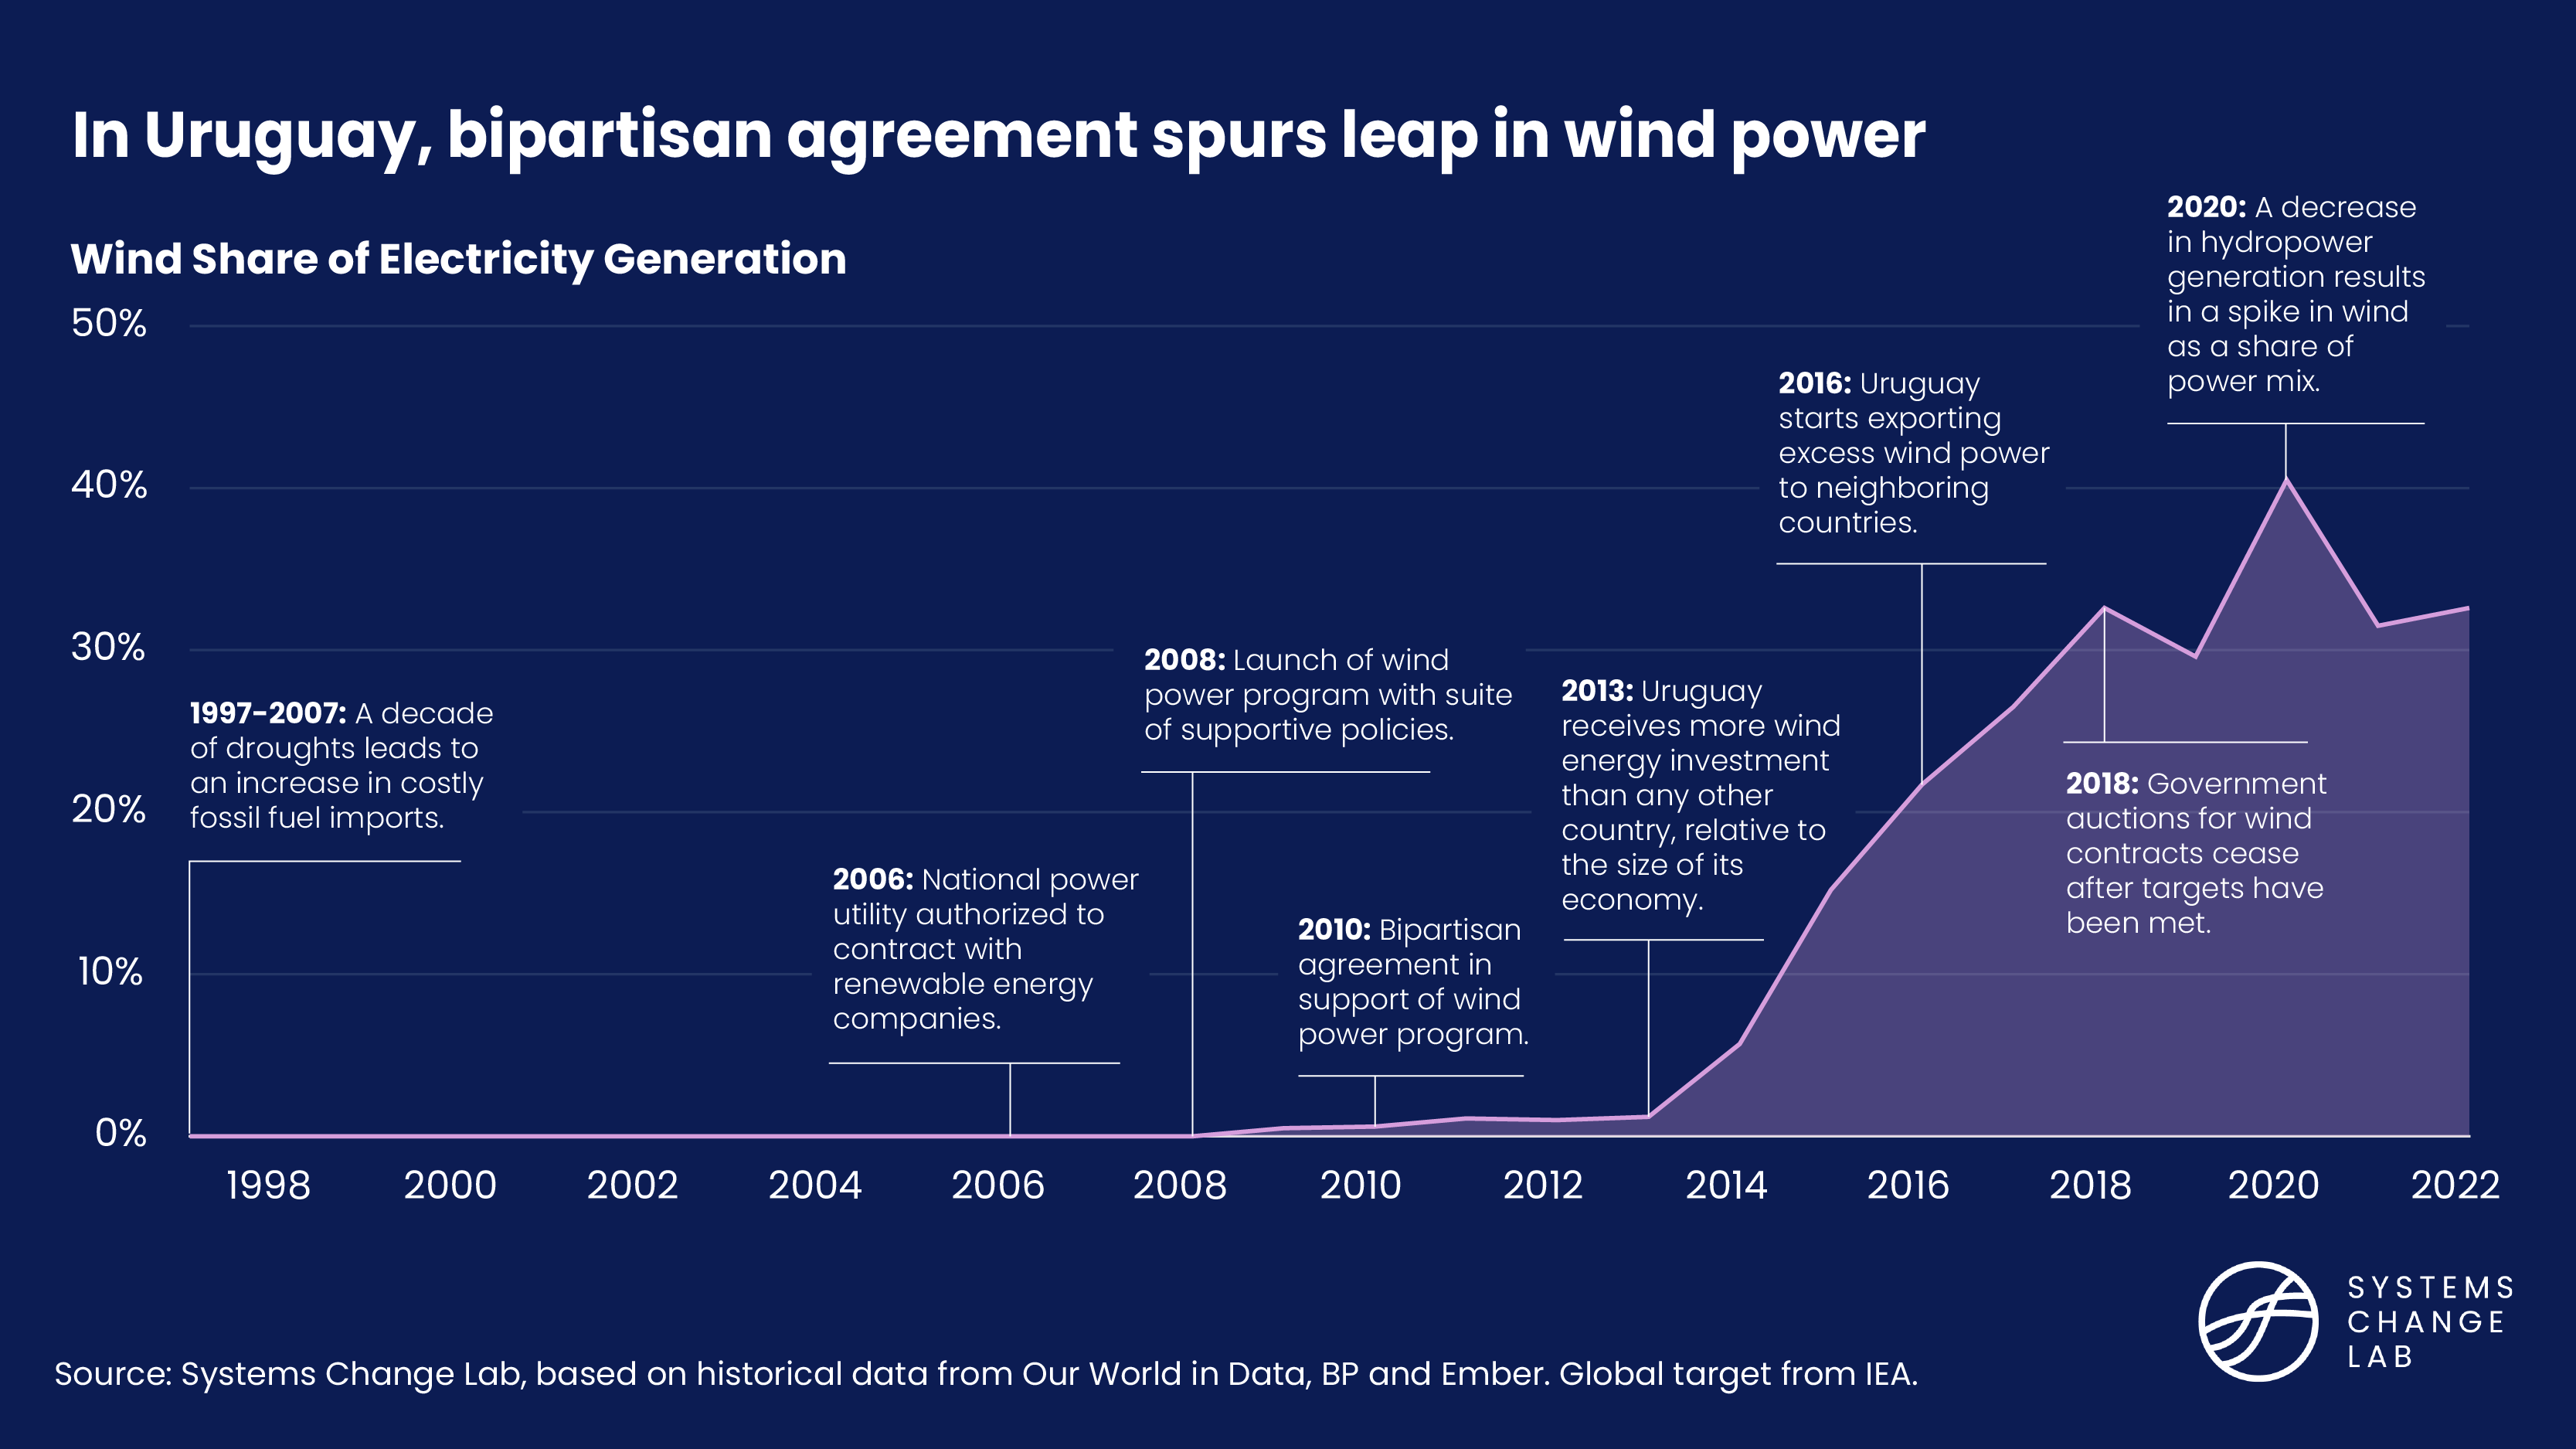 In Uruguay, bipartisan agreement spurs leap in wind power